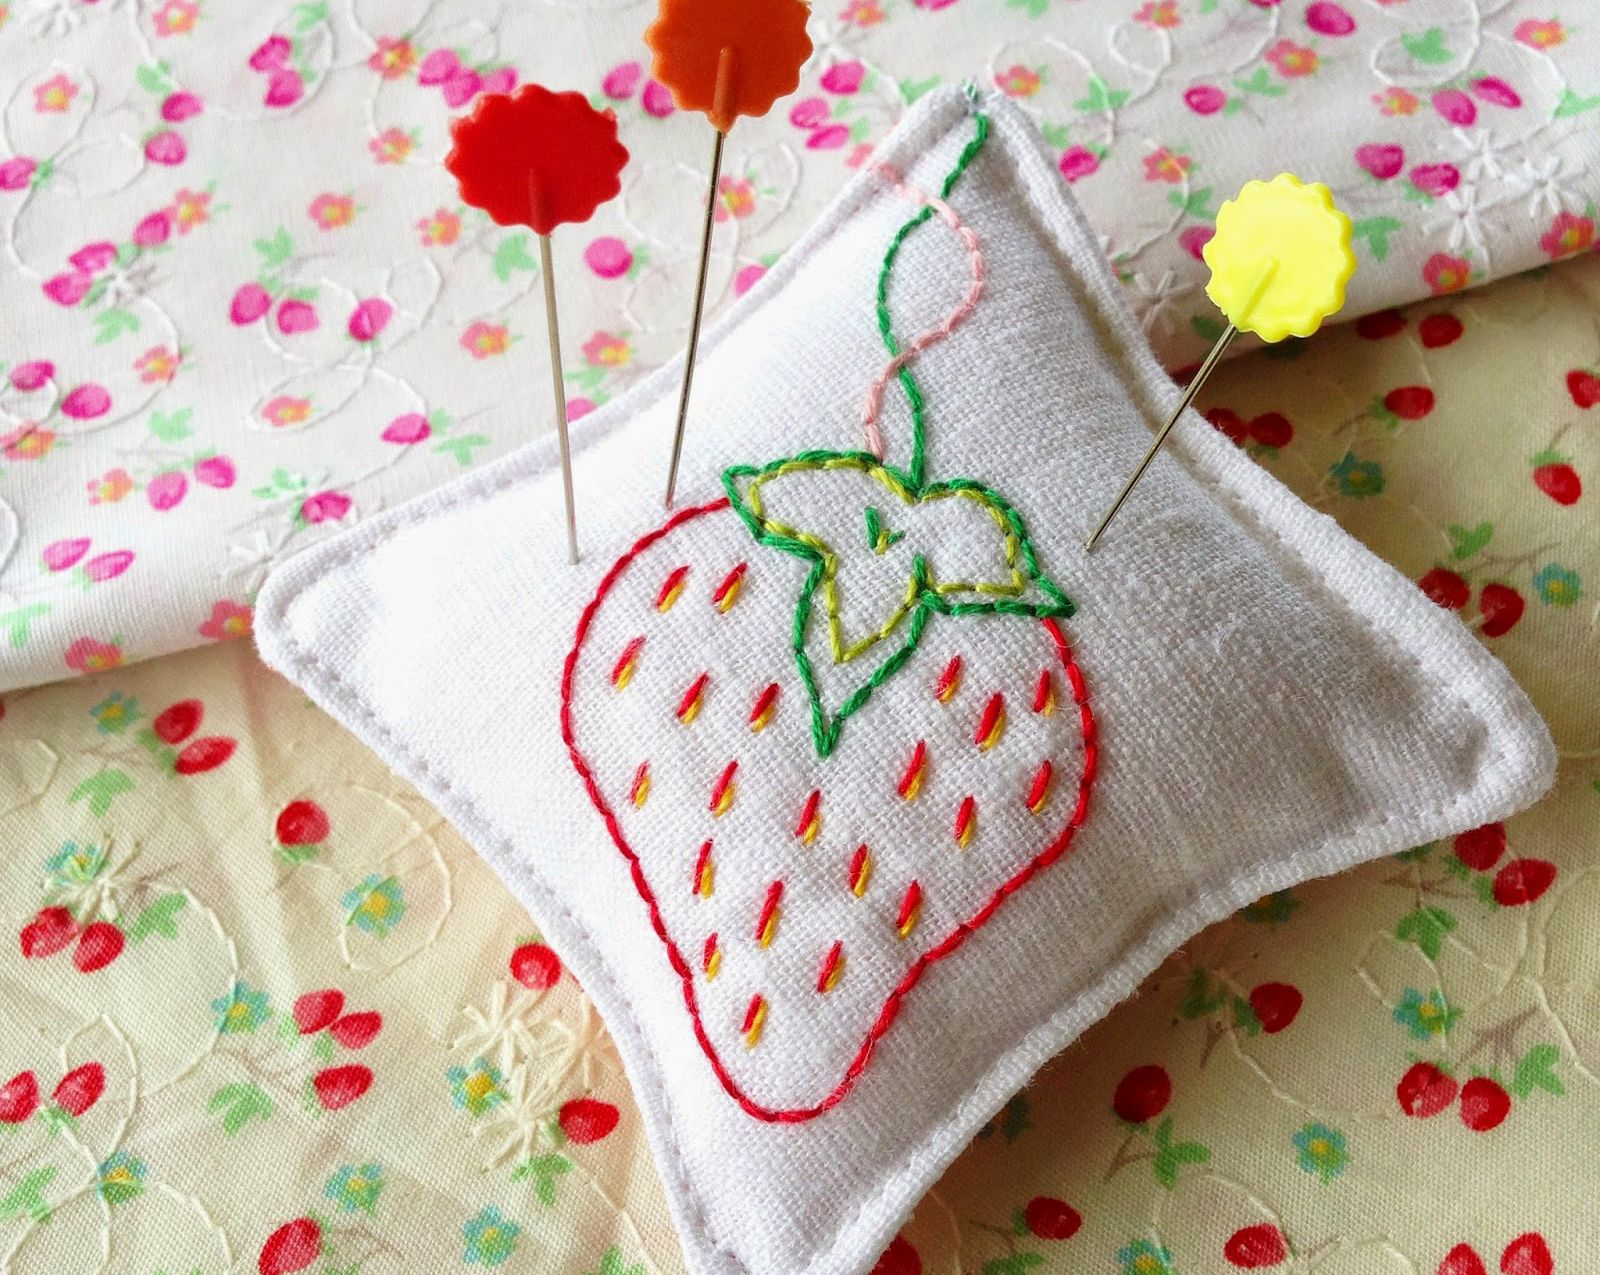 Card Embroidery Patterns 10 Free Embroidery Patterns For Beginners